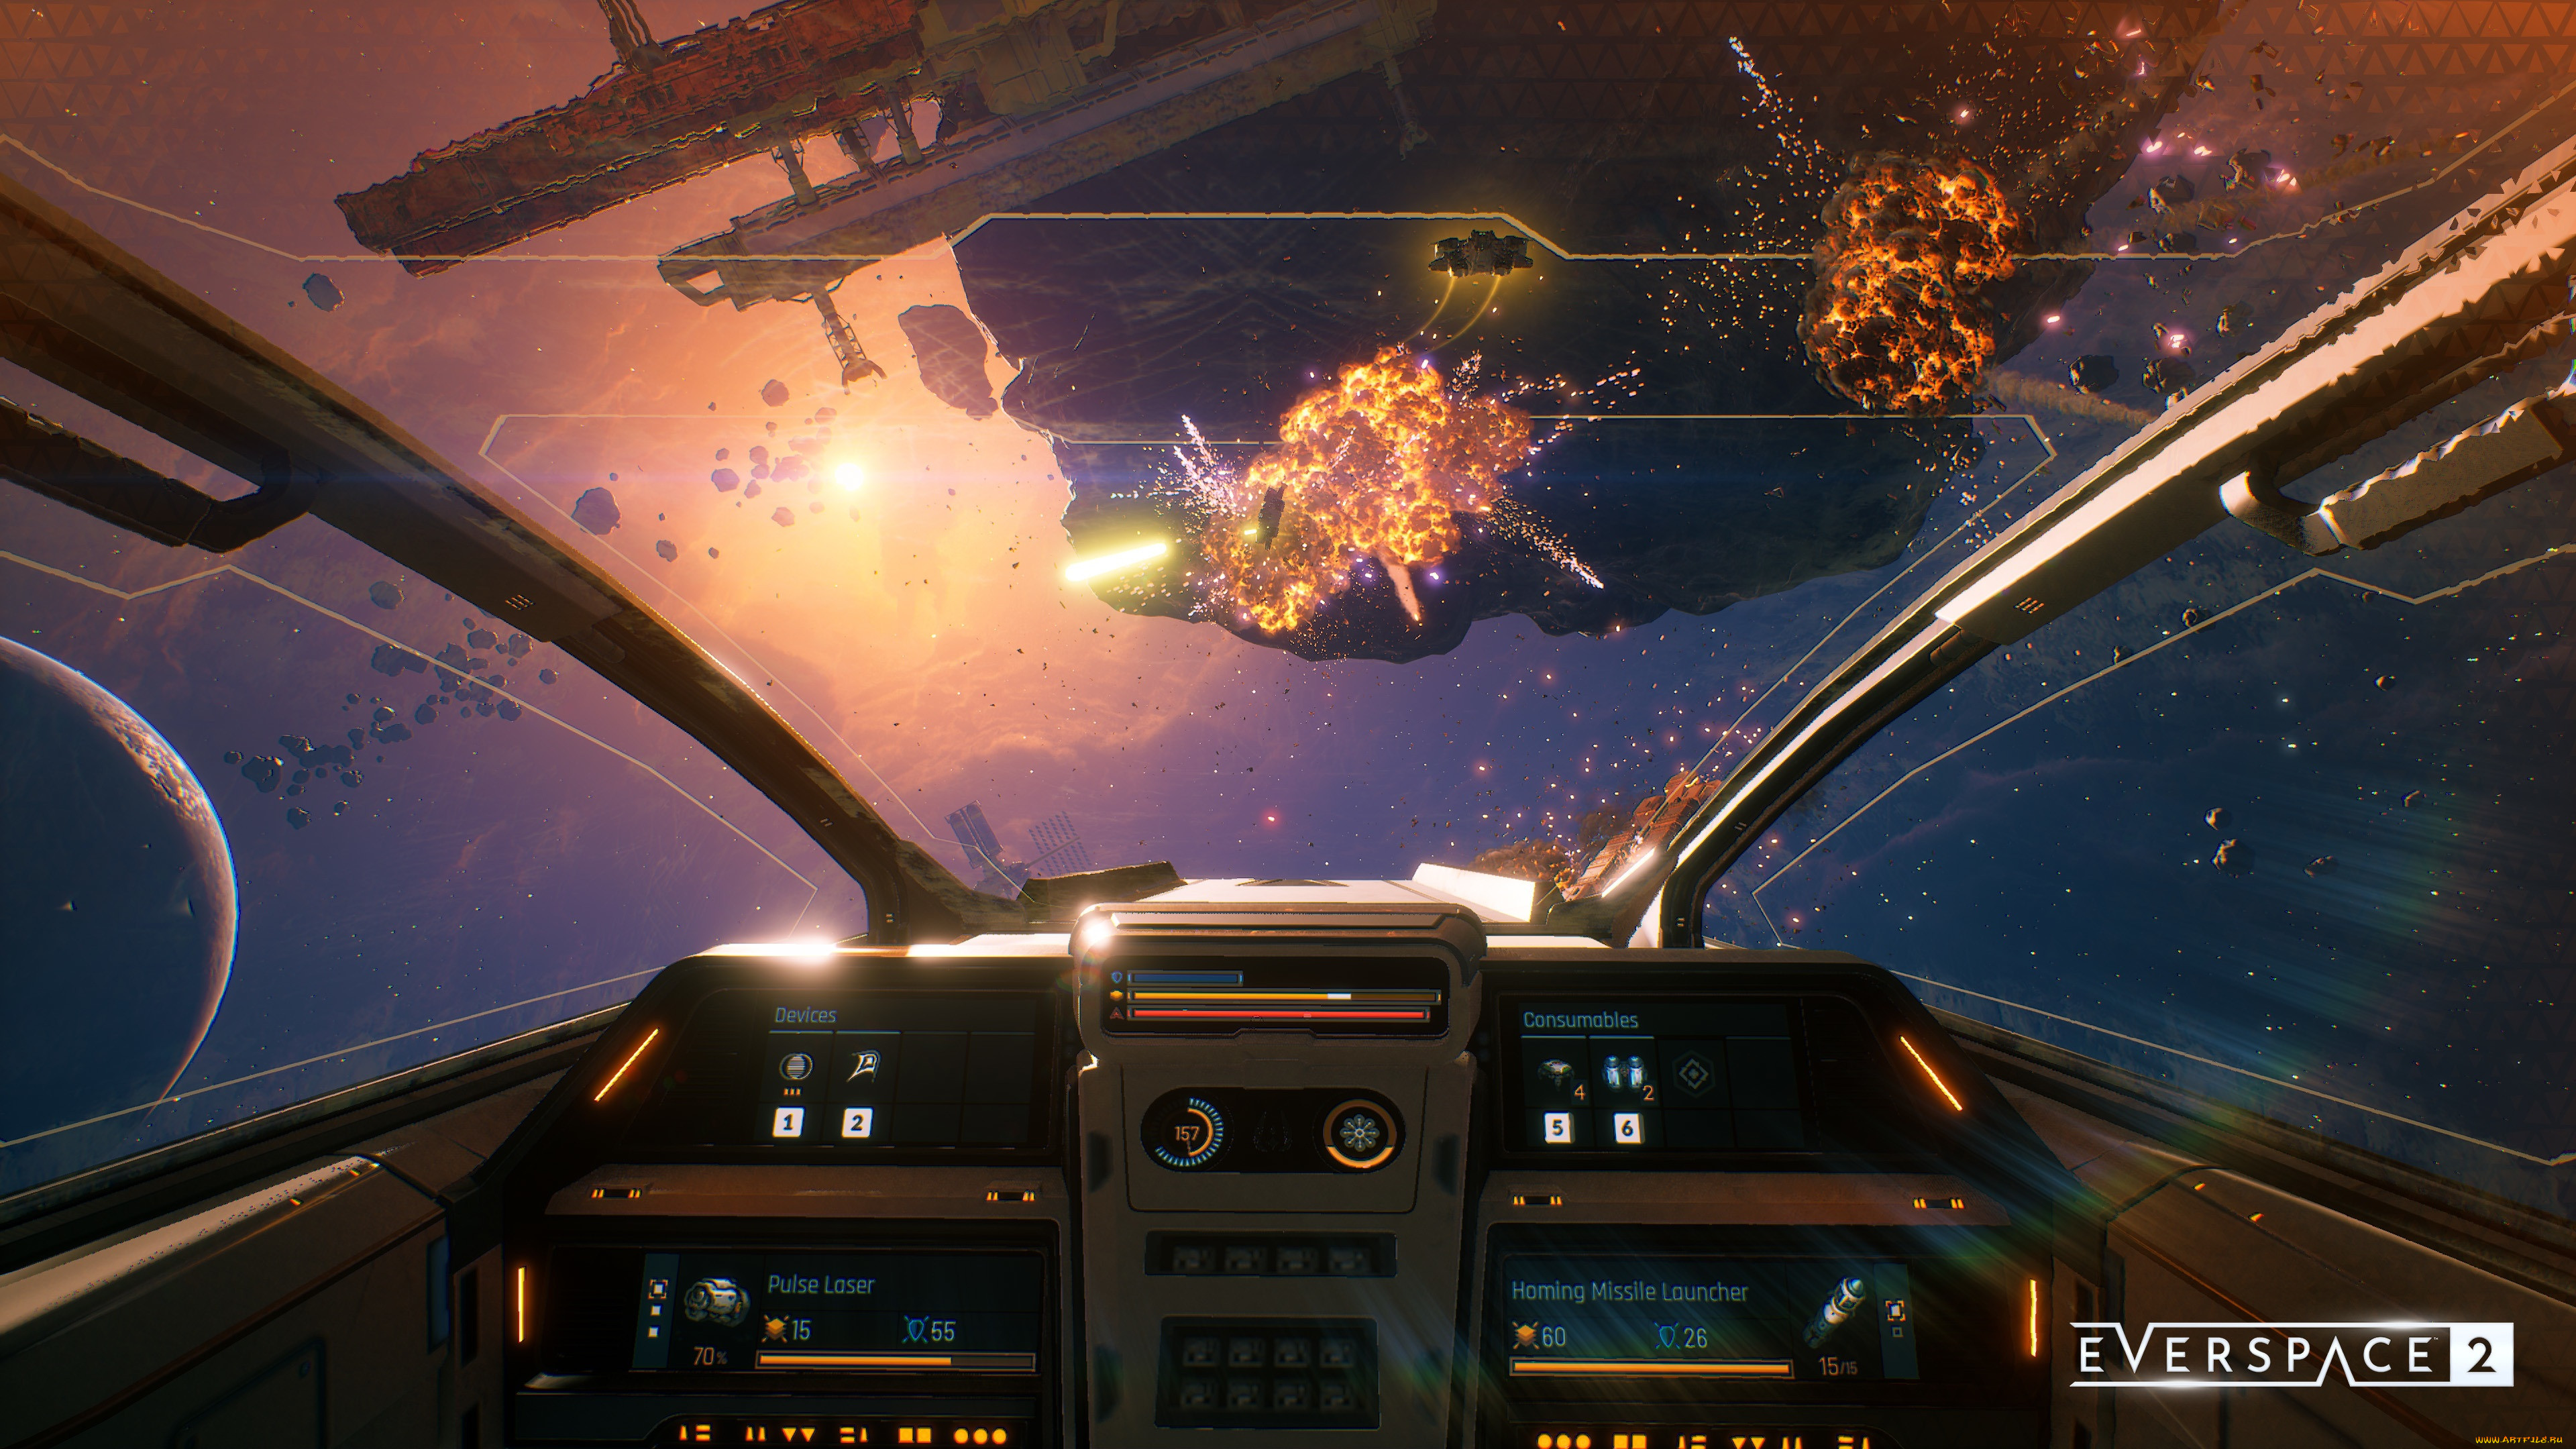  , everspace 2, everspace, 2